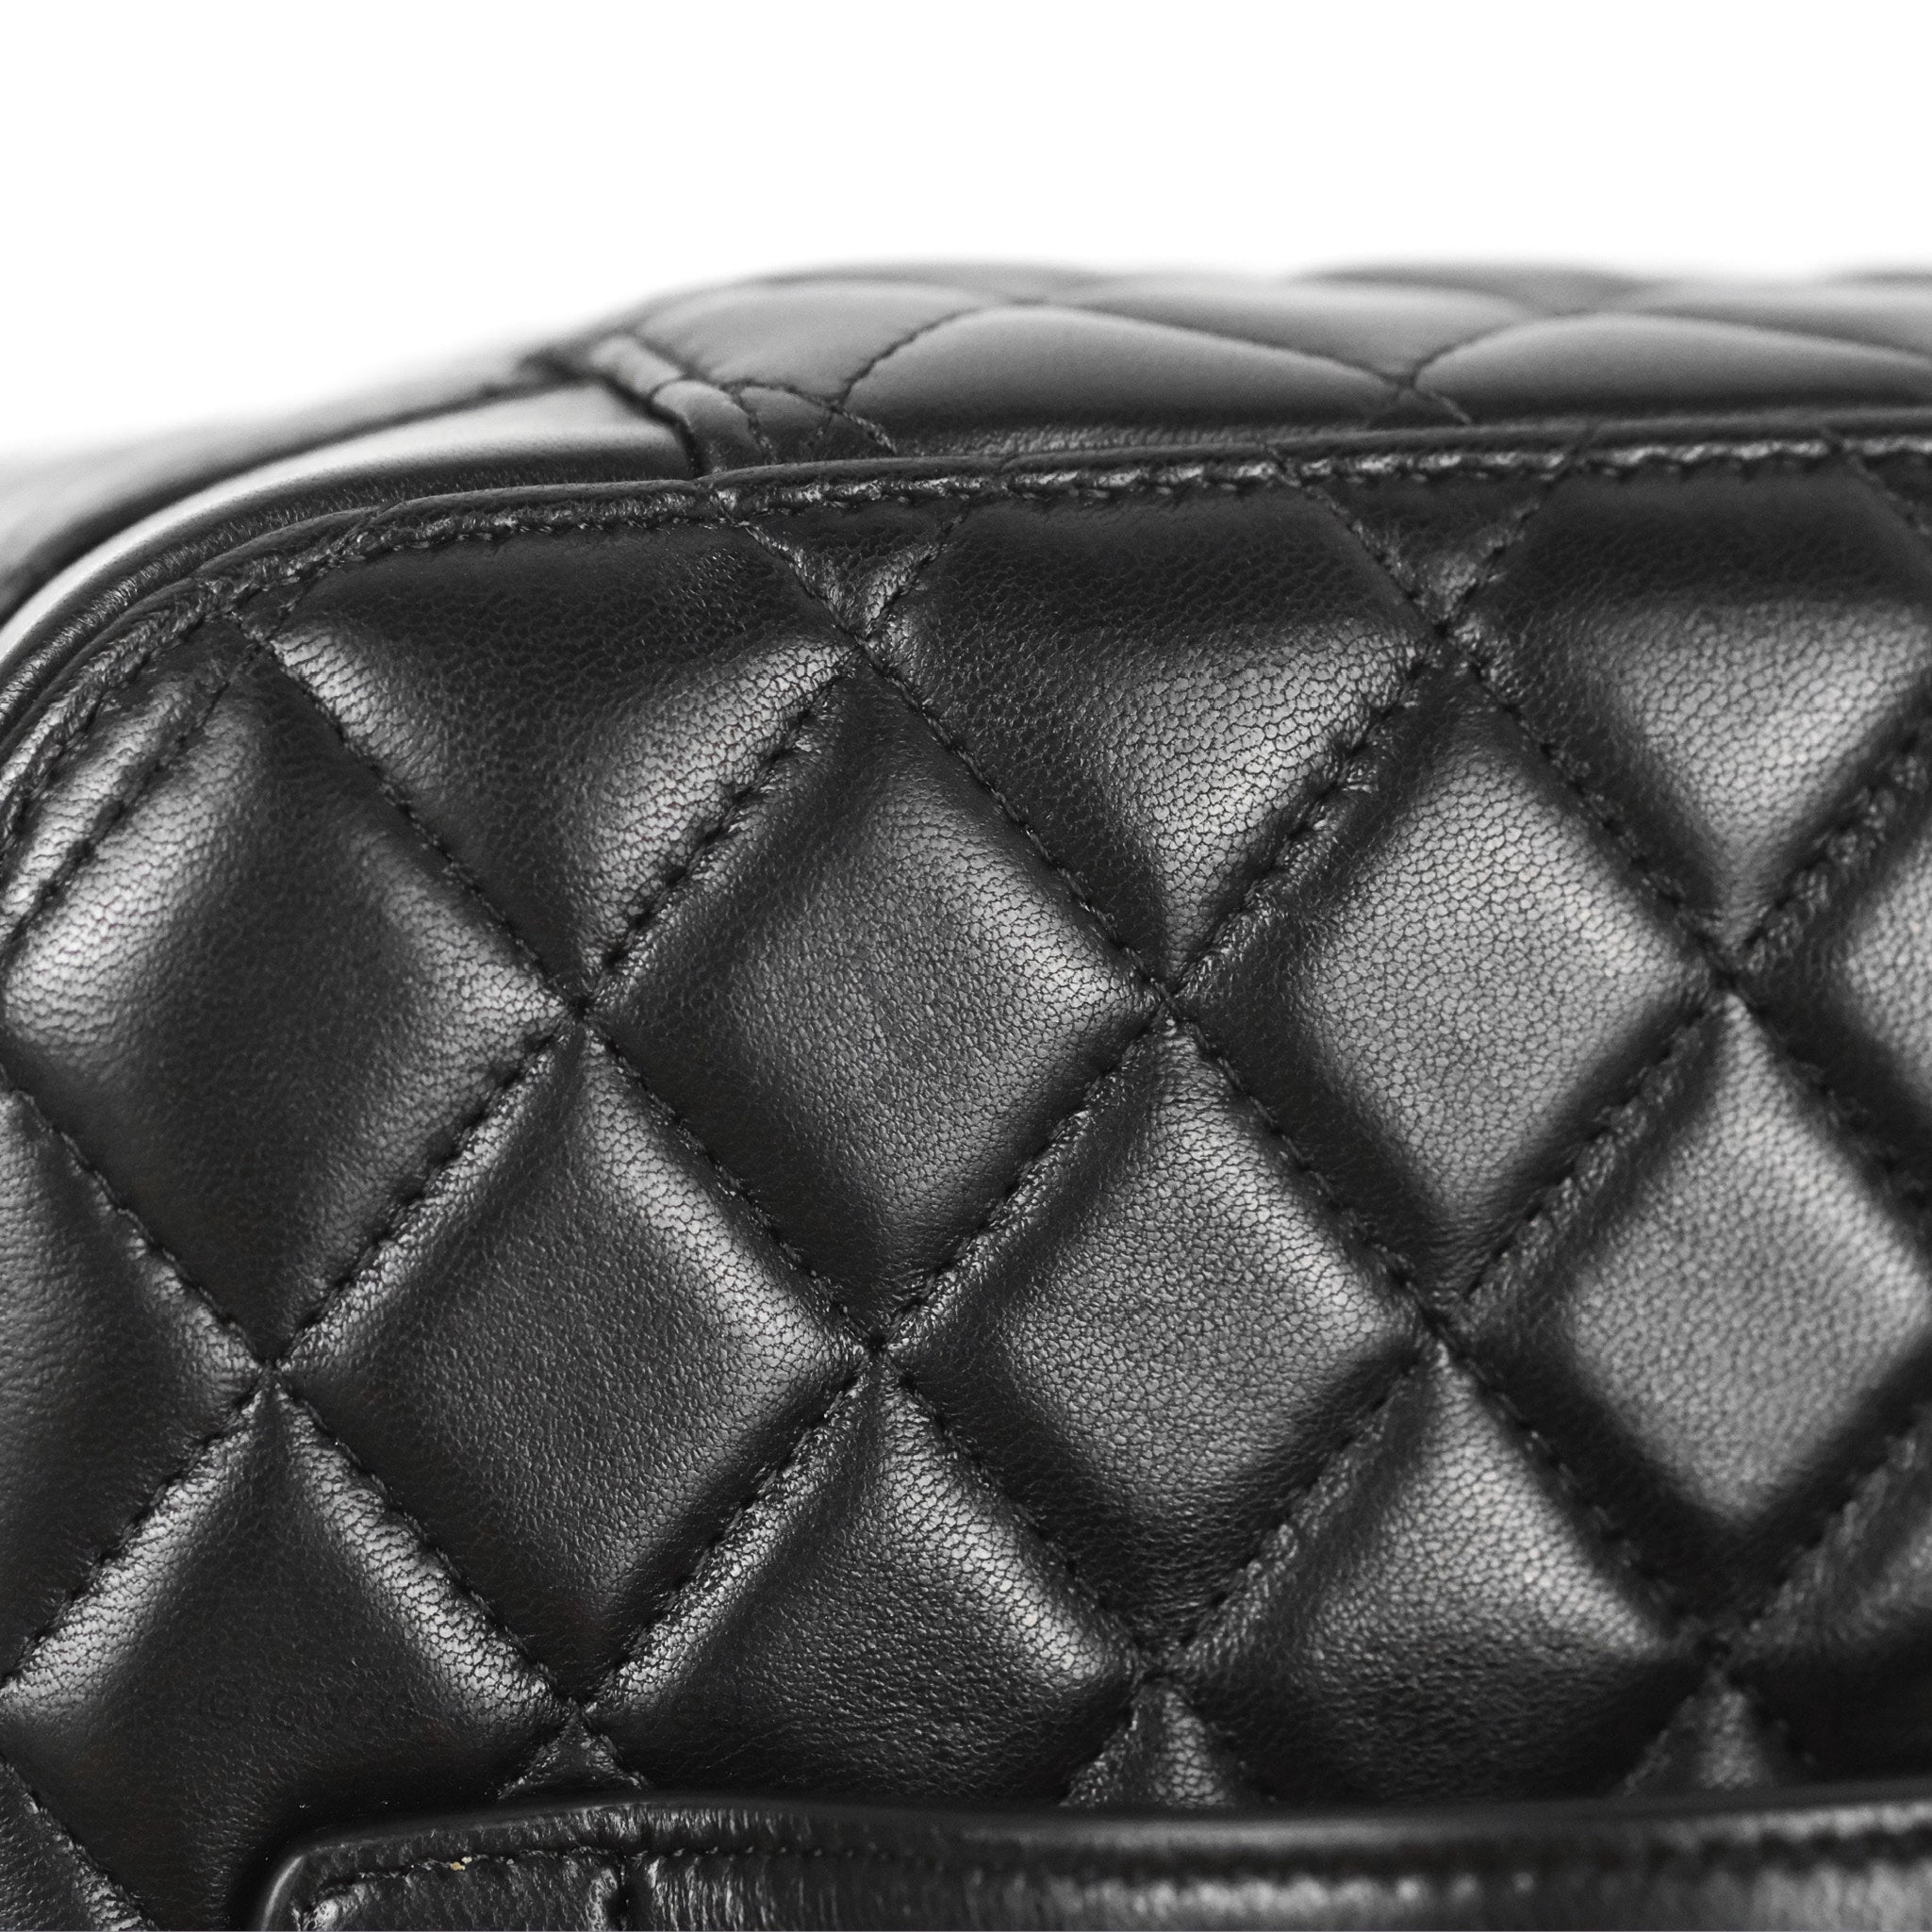 CHANEL, Bags, Chanel Vanity Case Makeup Cosmetic Bag Pouch Coco